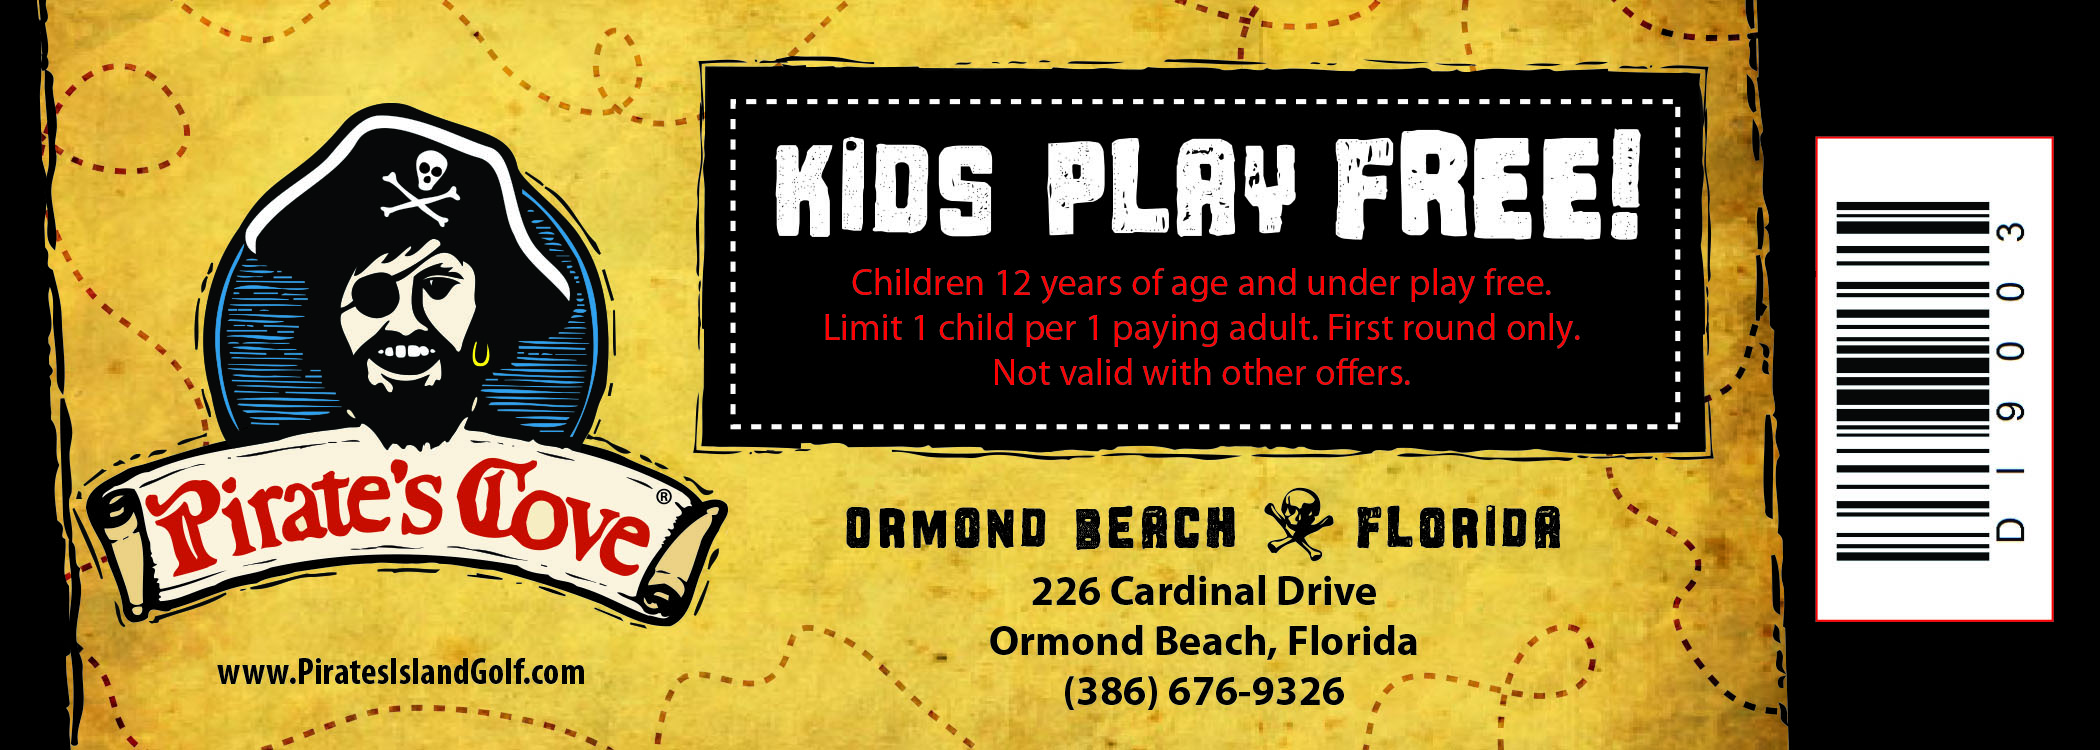 Kid's Play for FREE